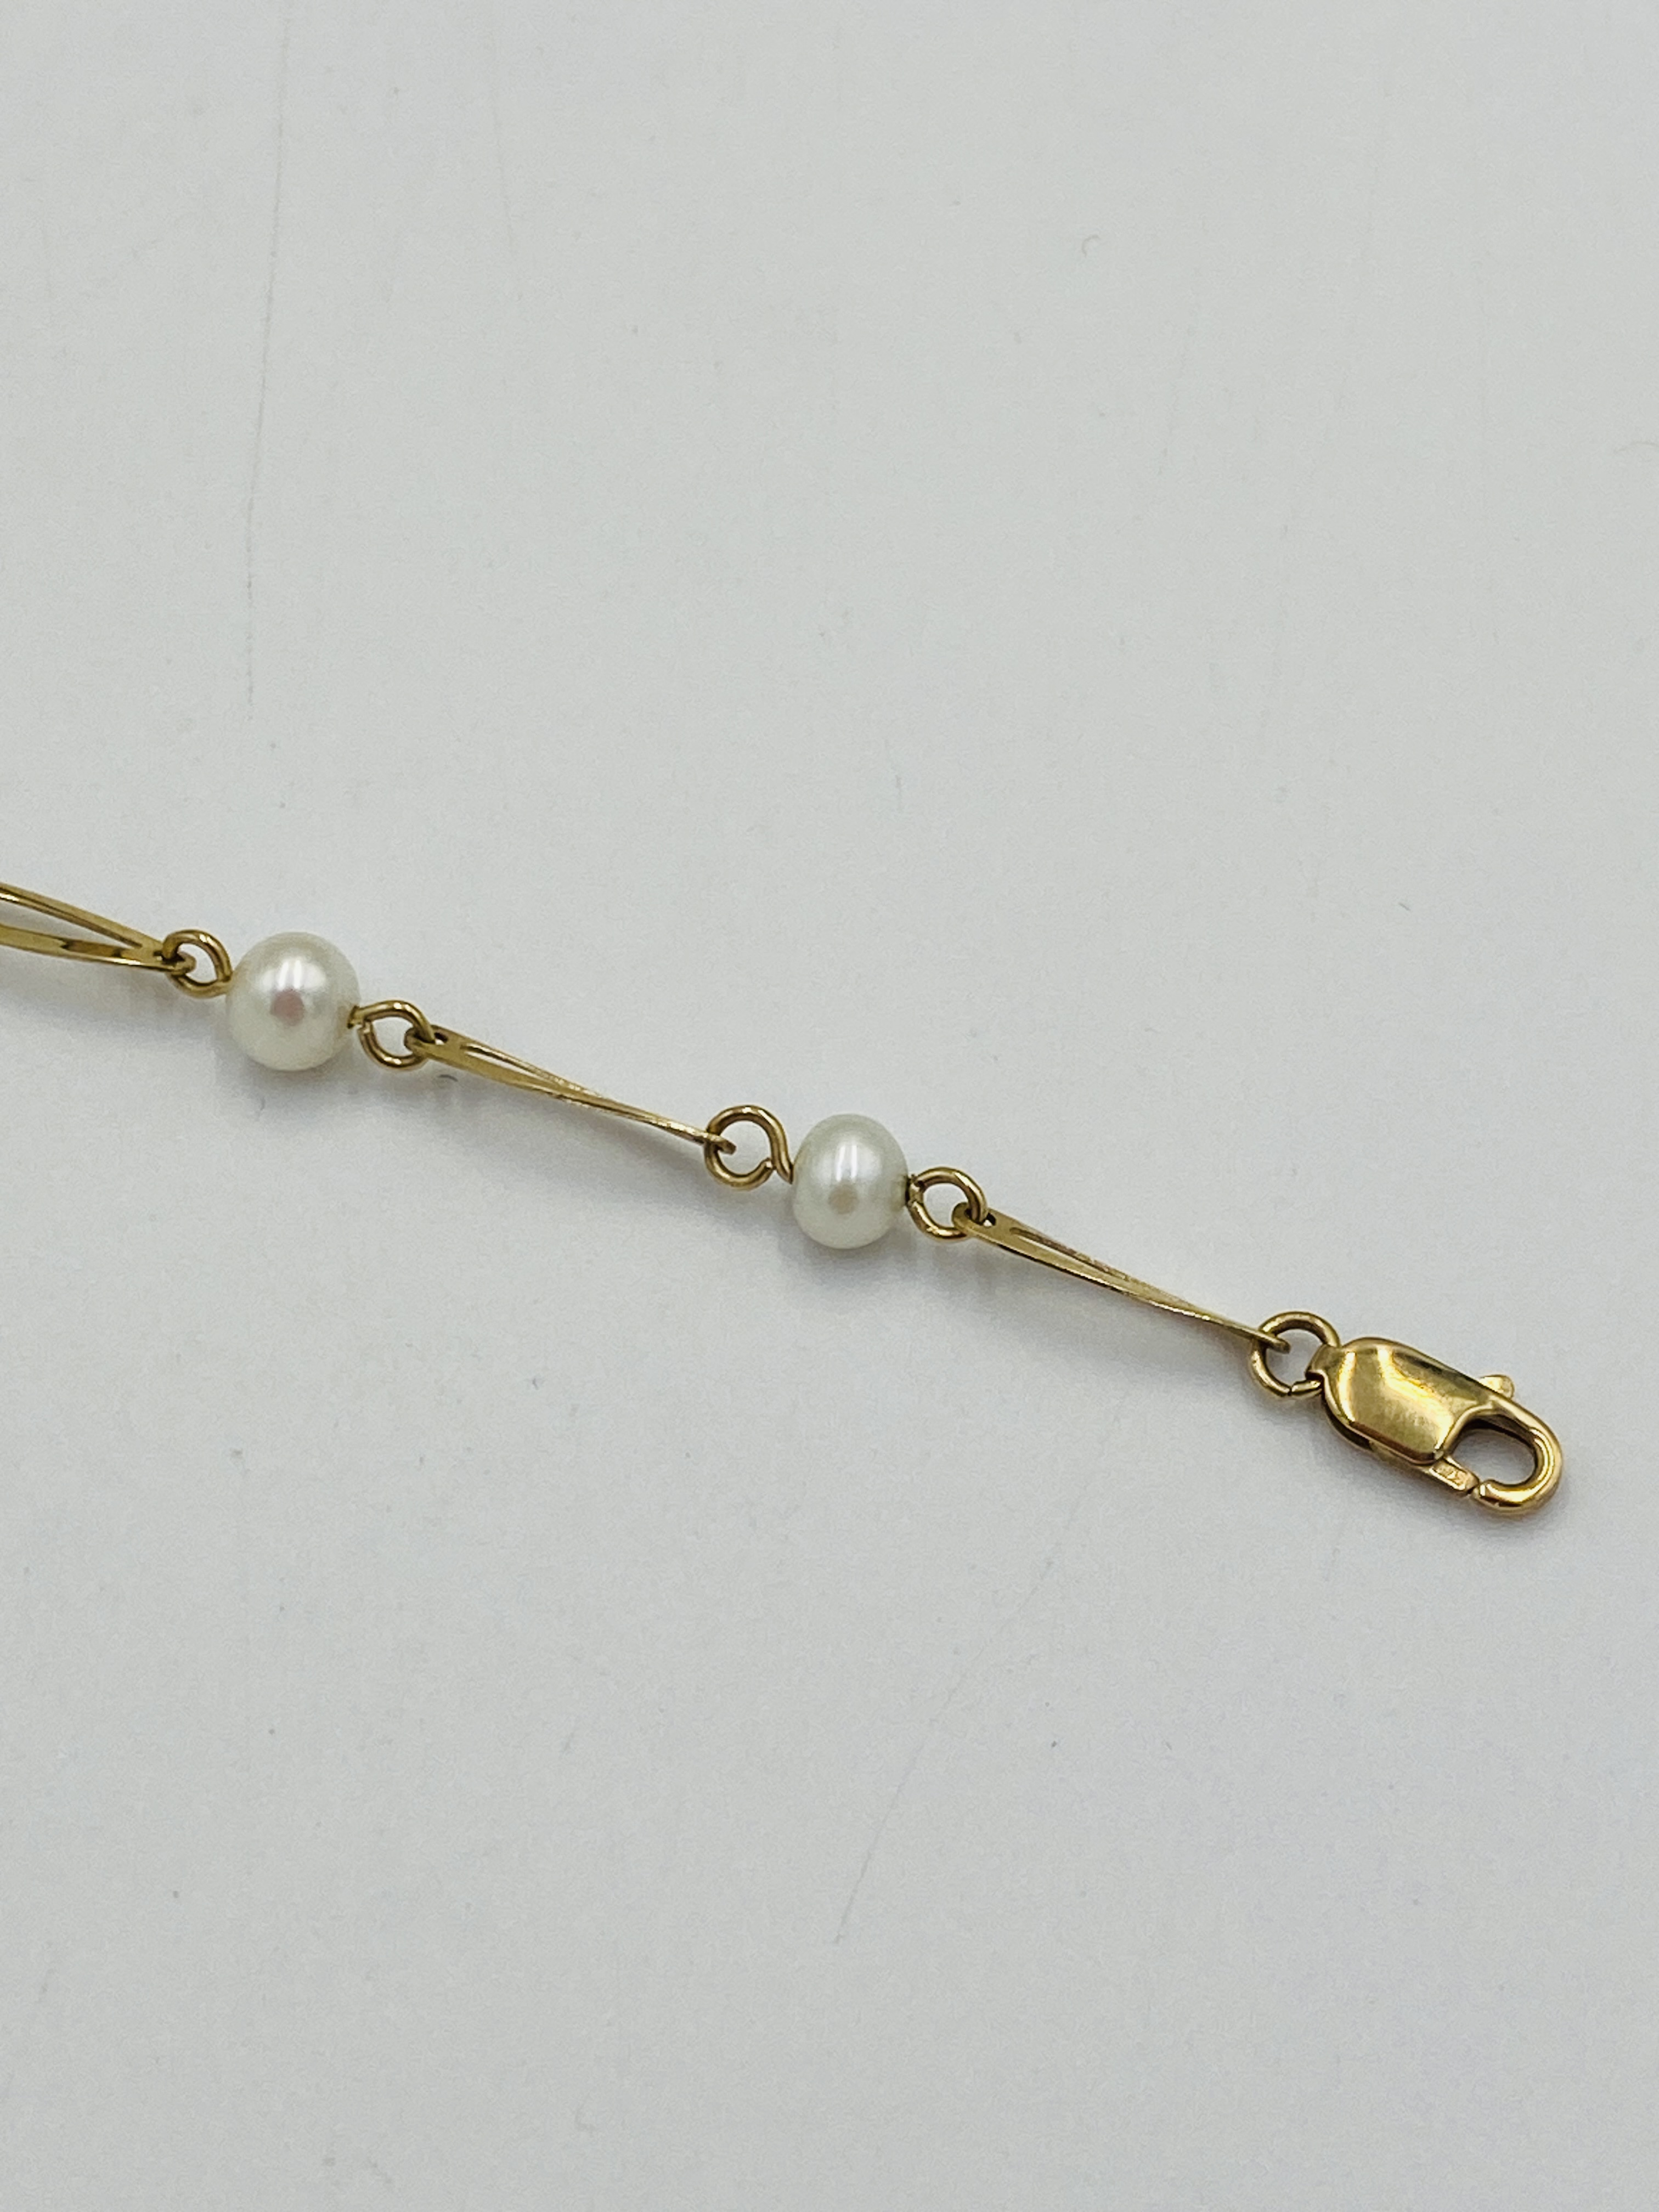 9ct gold and pearl bracelet - Image 4 of 5